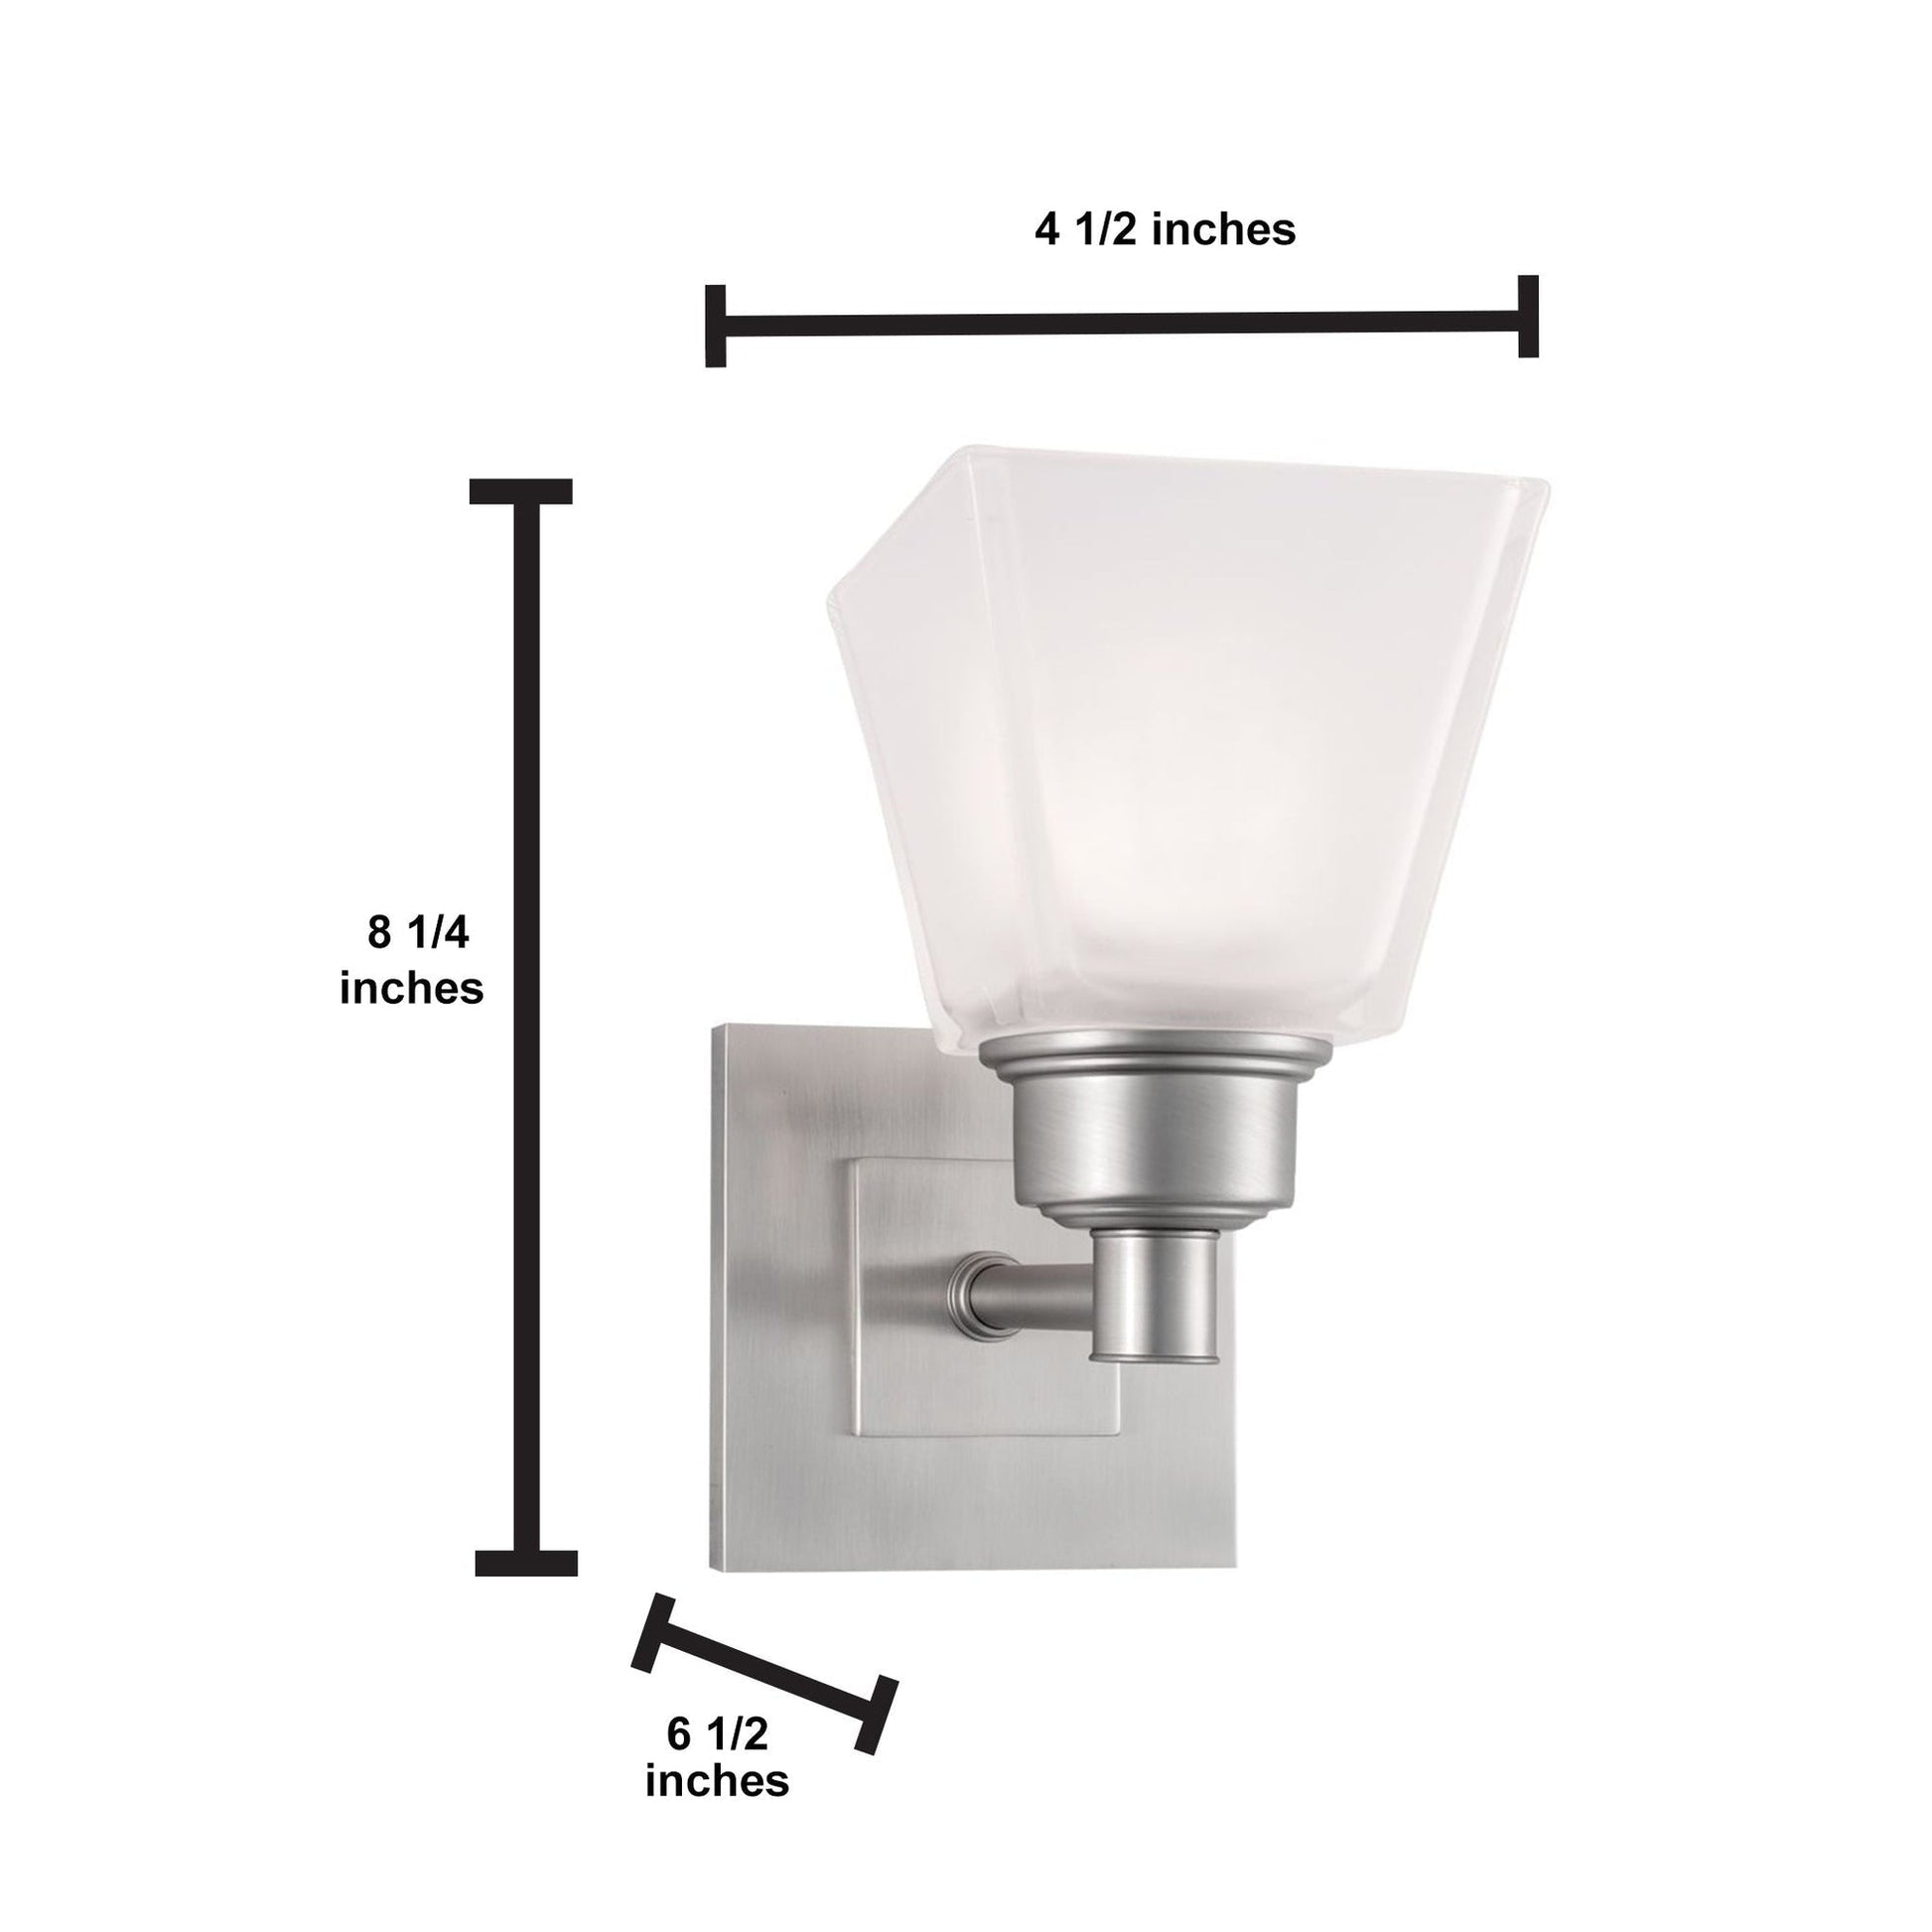 Norwell Lighting Matthew 8" x 5" 1-Light Brushed Nickel Vanity Wall Sconce With Square Glass Diffuser